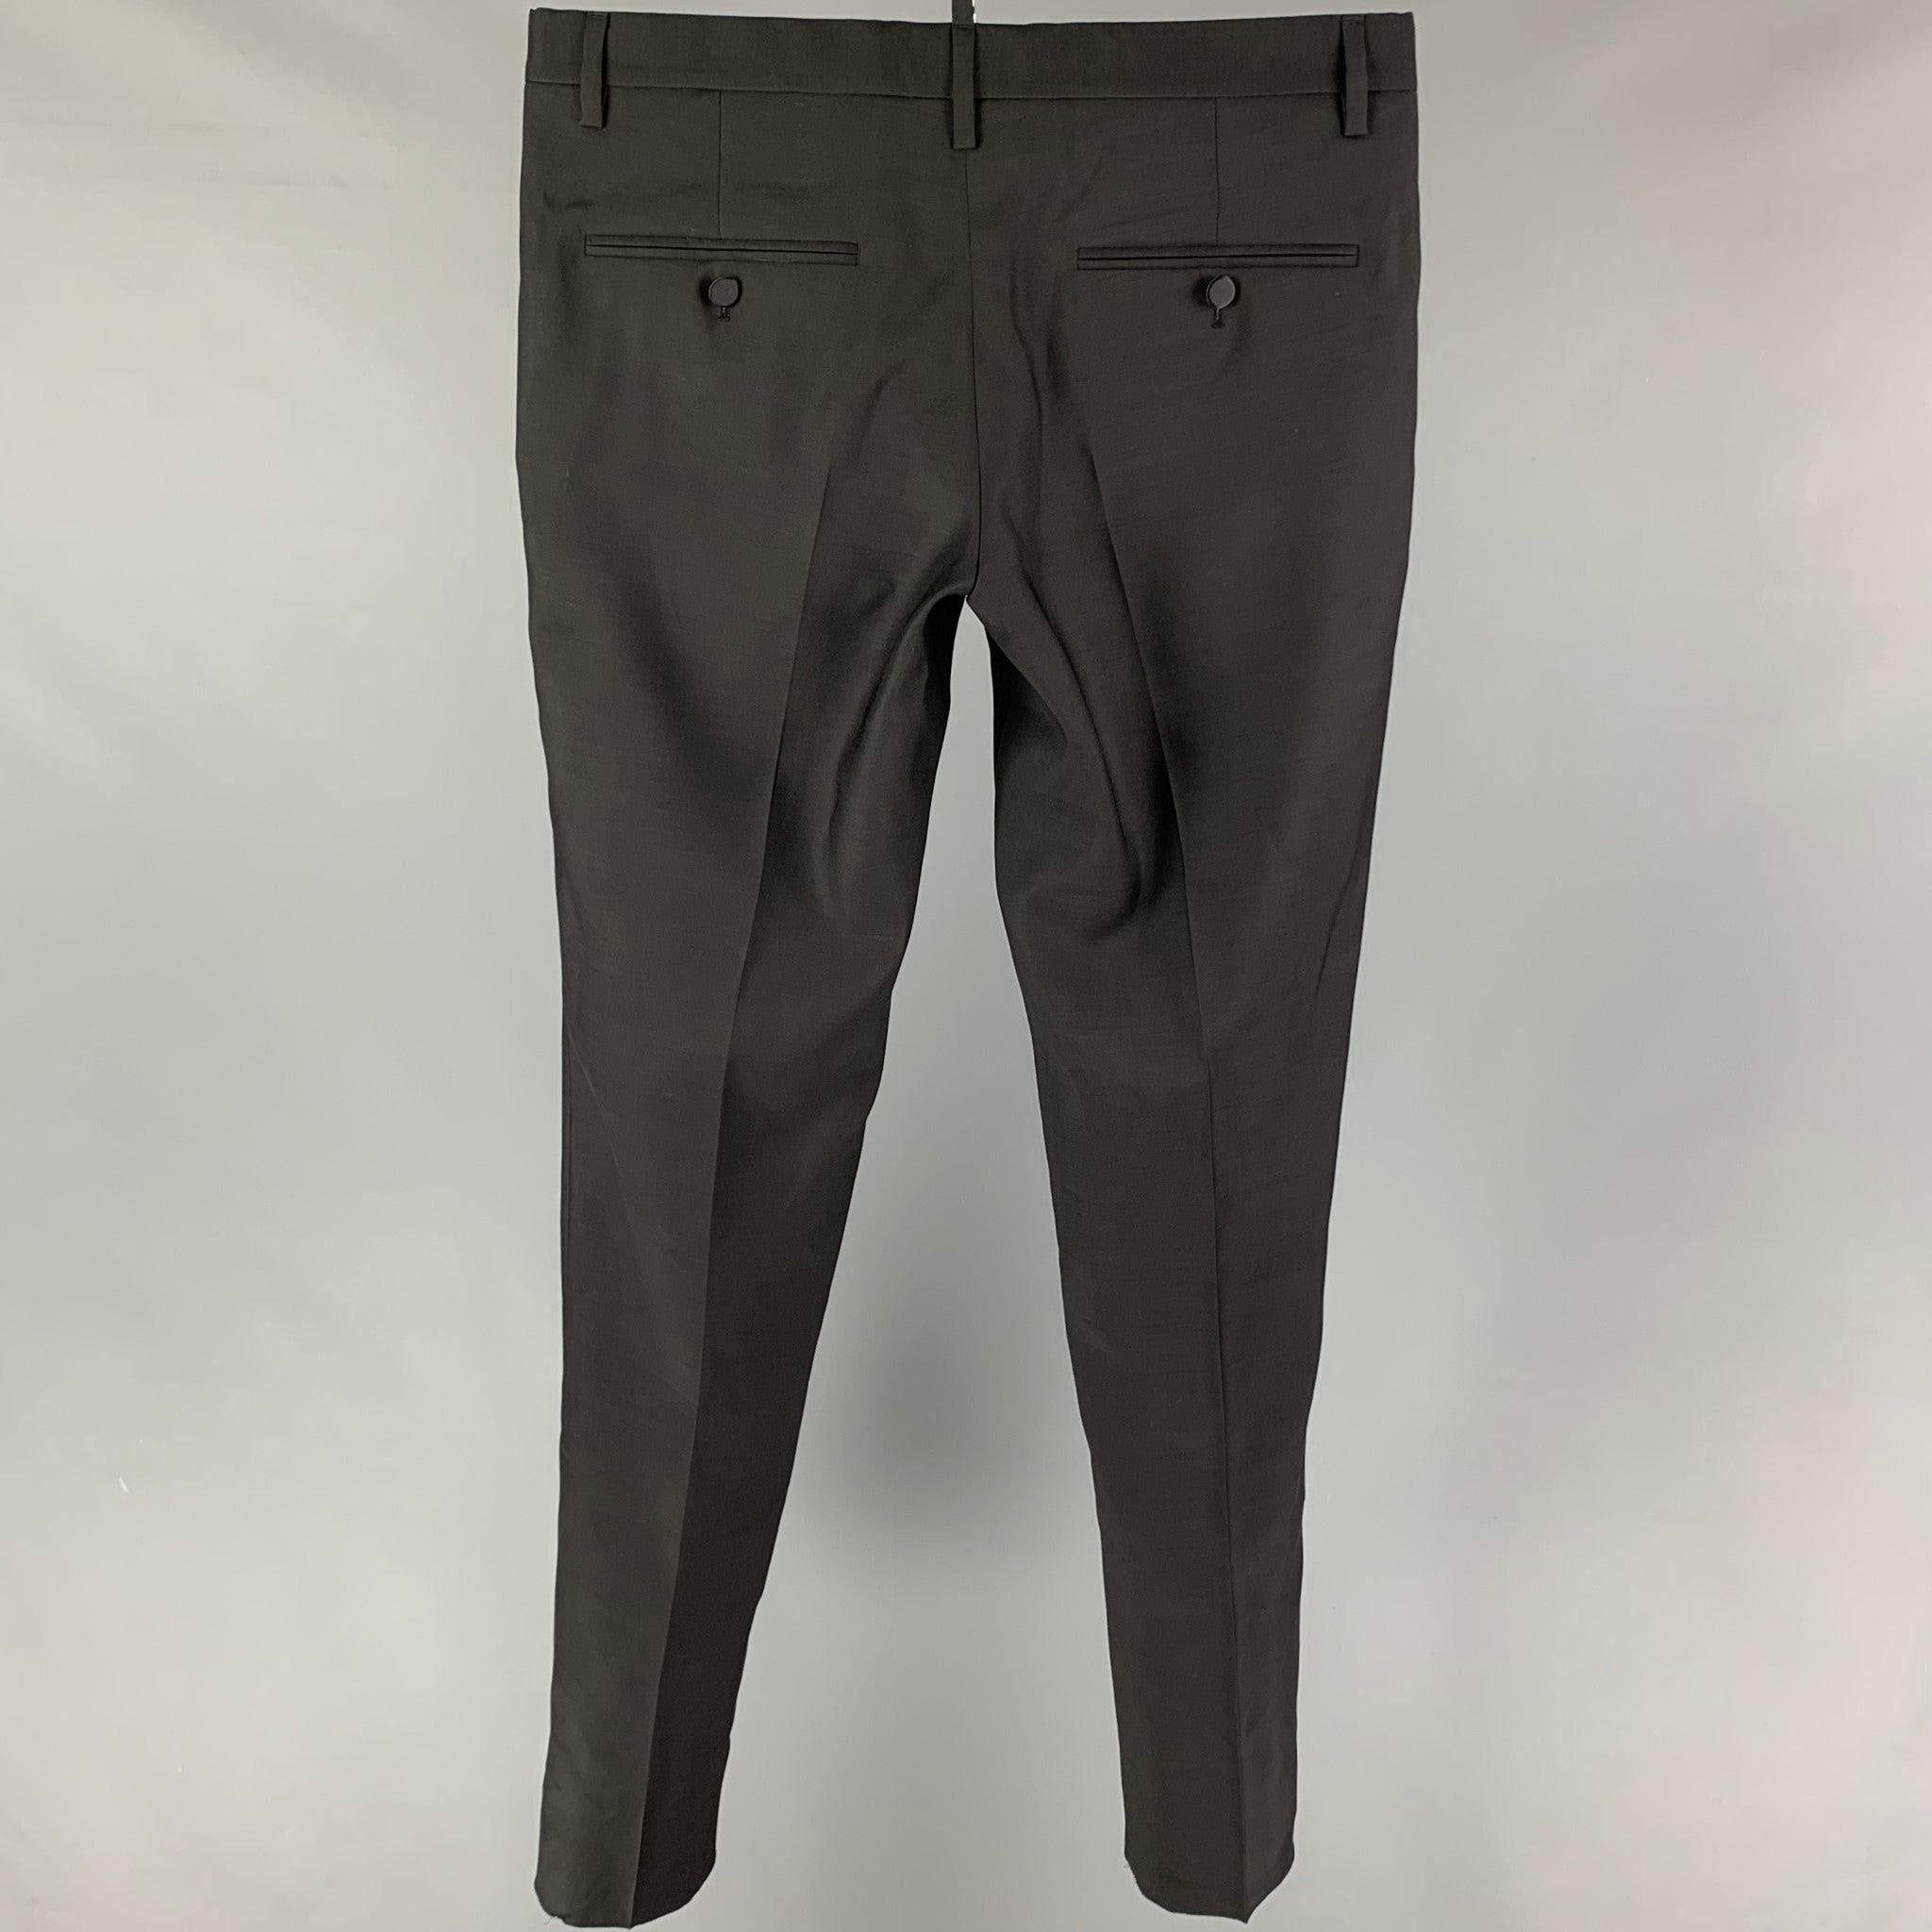 DSQUARED2 dress pants comes in a black cotton / silk featuring a slim fit, front tab, and a buttno fly closure. Made in Italy.
Very Good
Pre-Owned Condition. 

Marked:   48 

Measurements: 
  Waist: 34 inches  Rise: 10 inches  Inseam: 36 inches 
  
